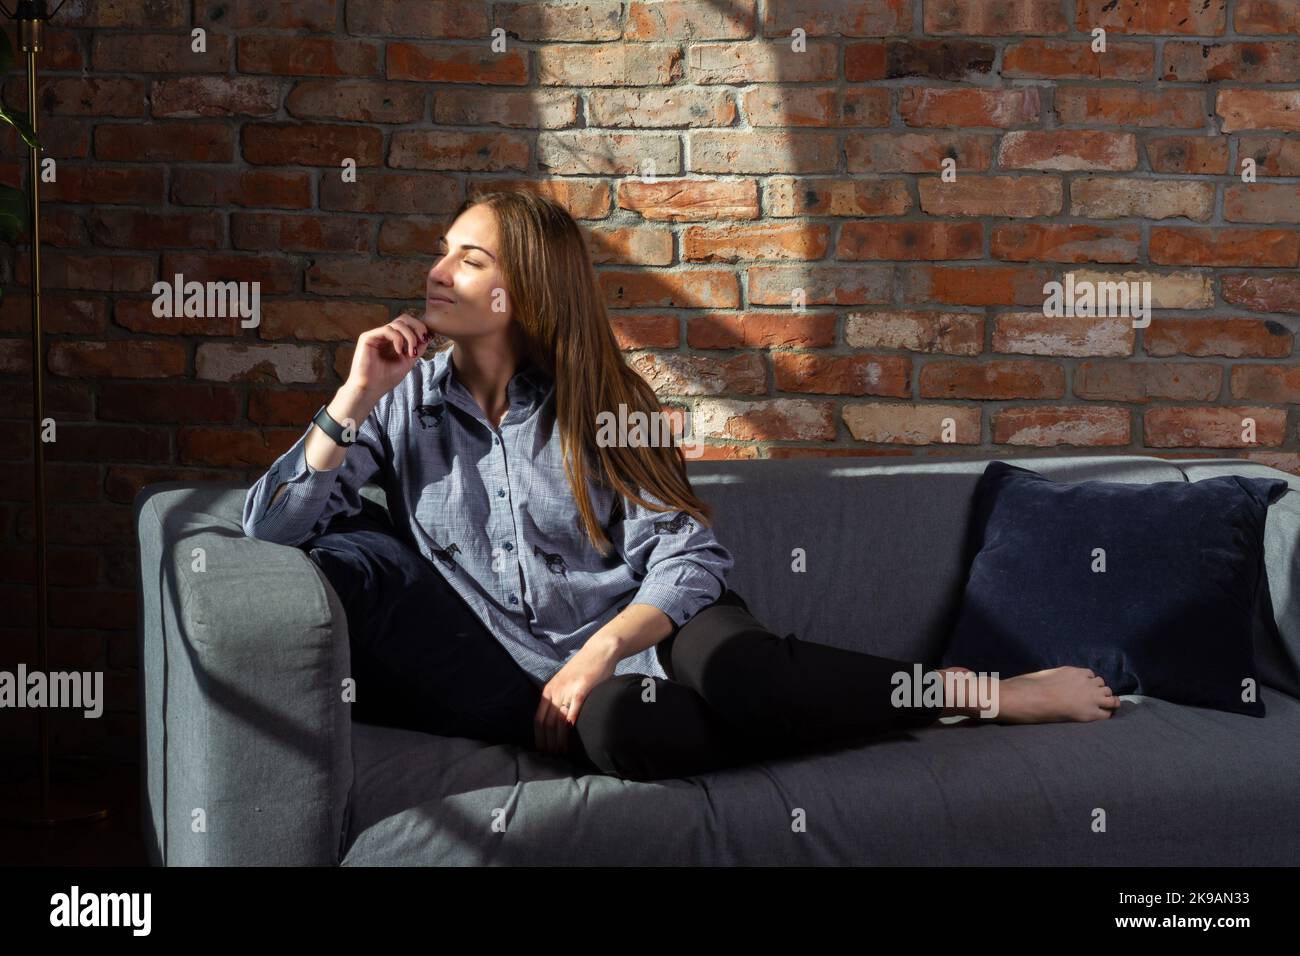 Woman in a blue shirt on the couch dreaming in the sunlight coming from windows Stock Photo